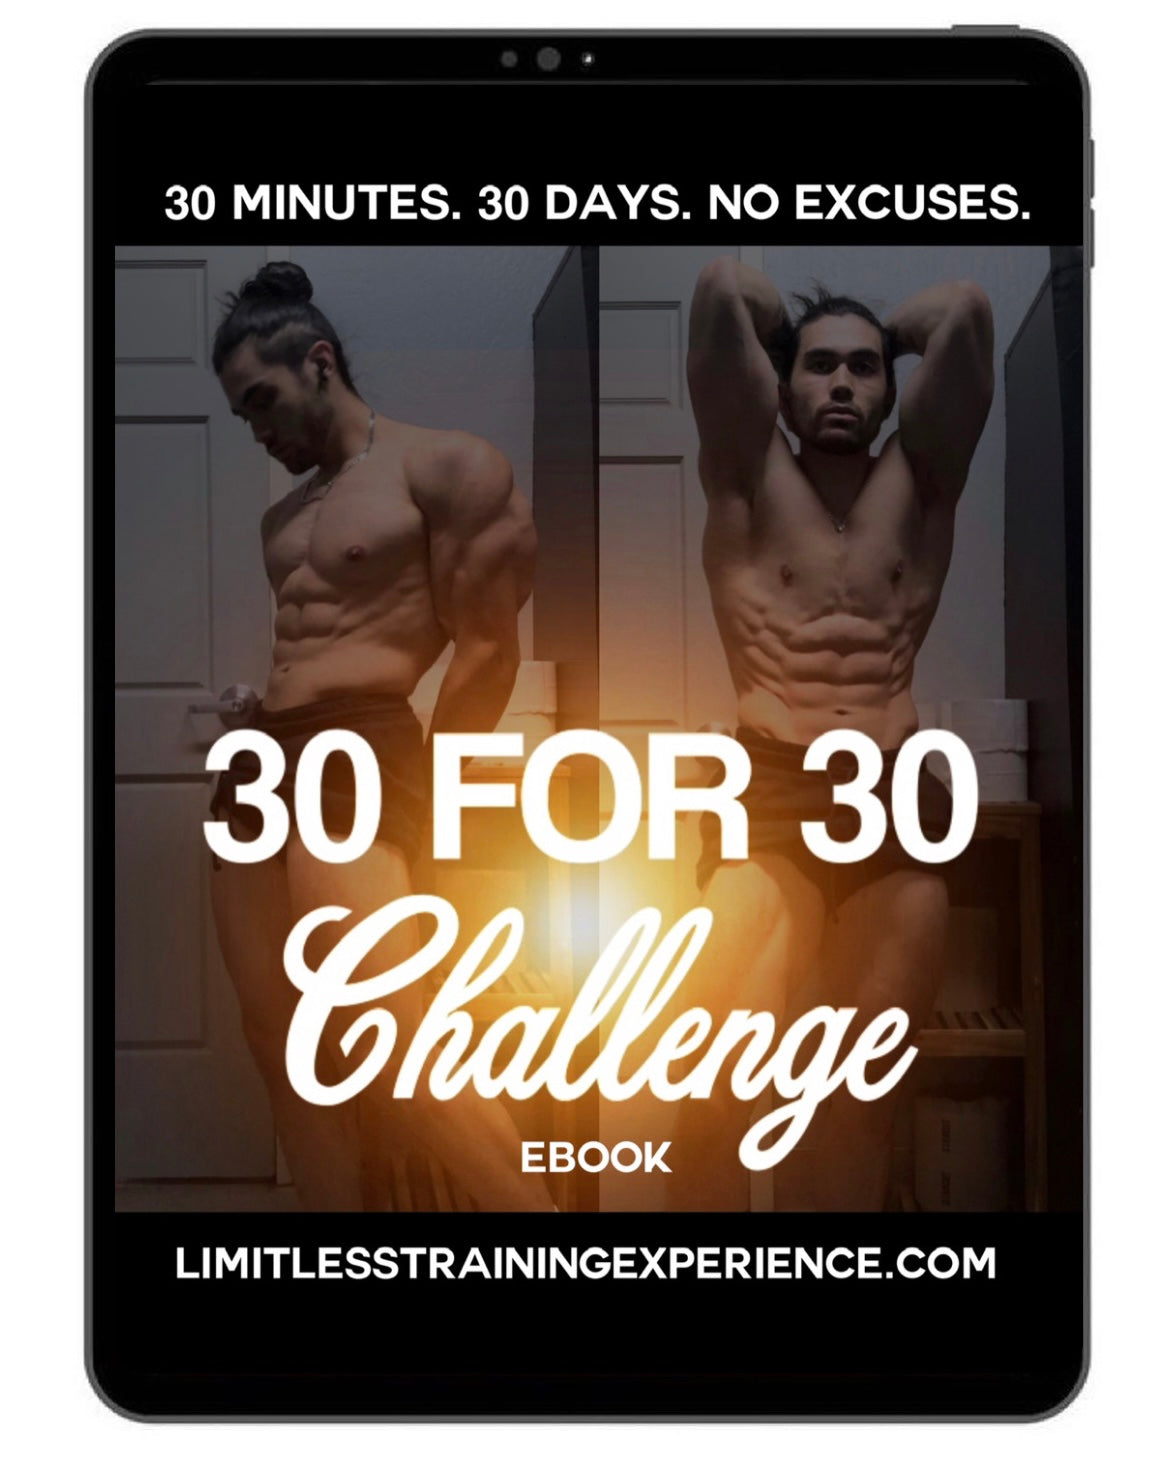 30 FOR 30 CHALLENGE EBOOK